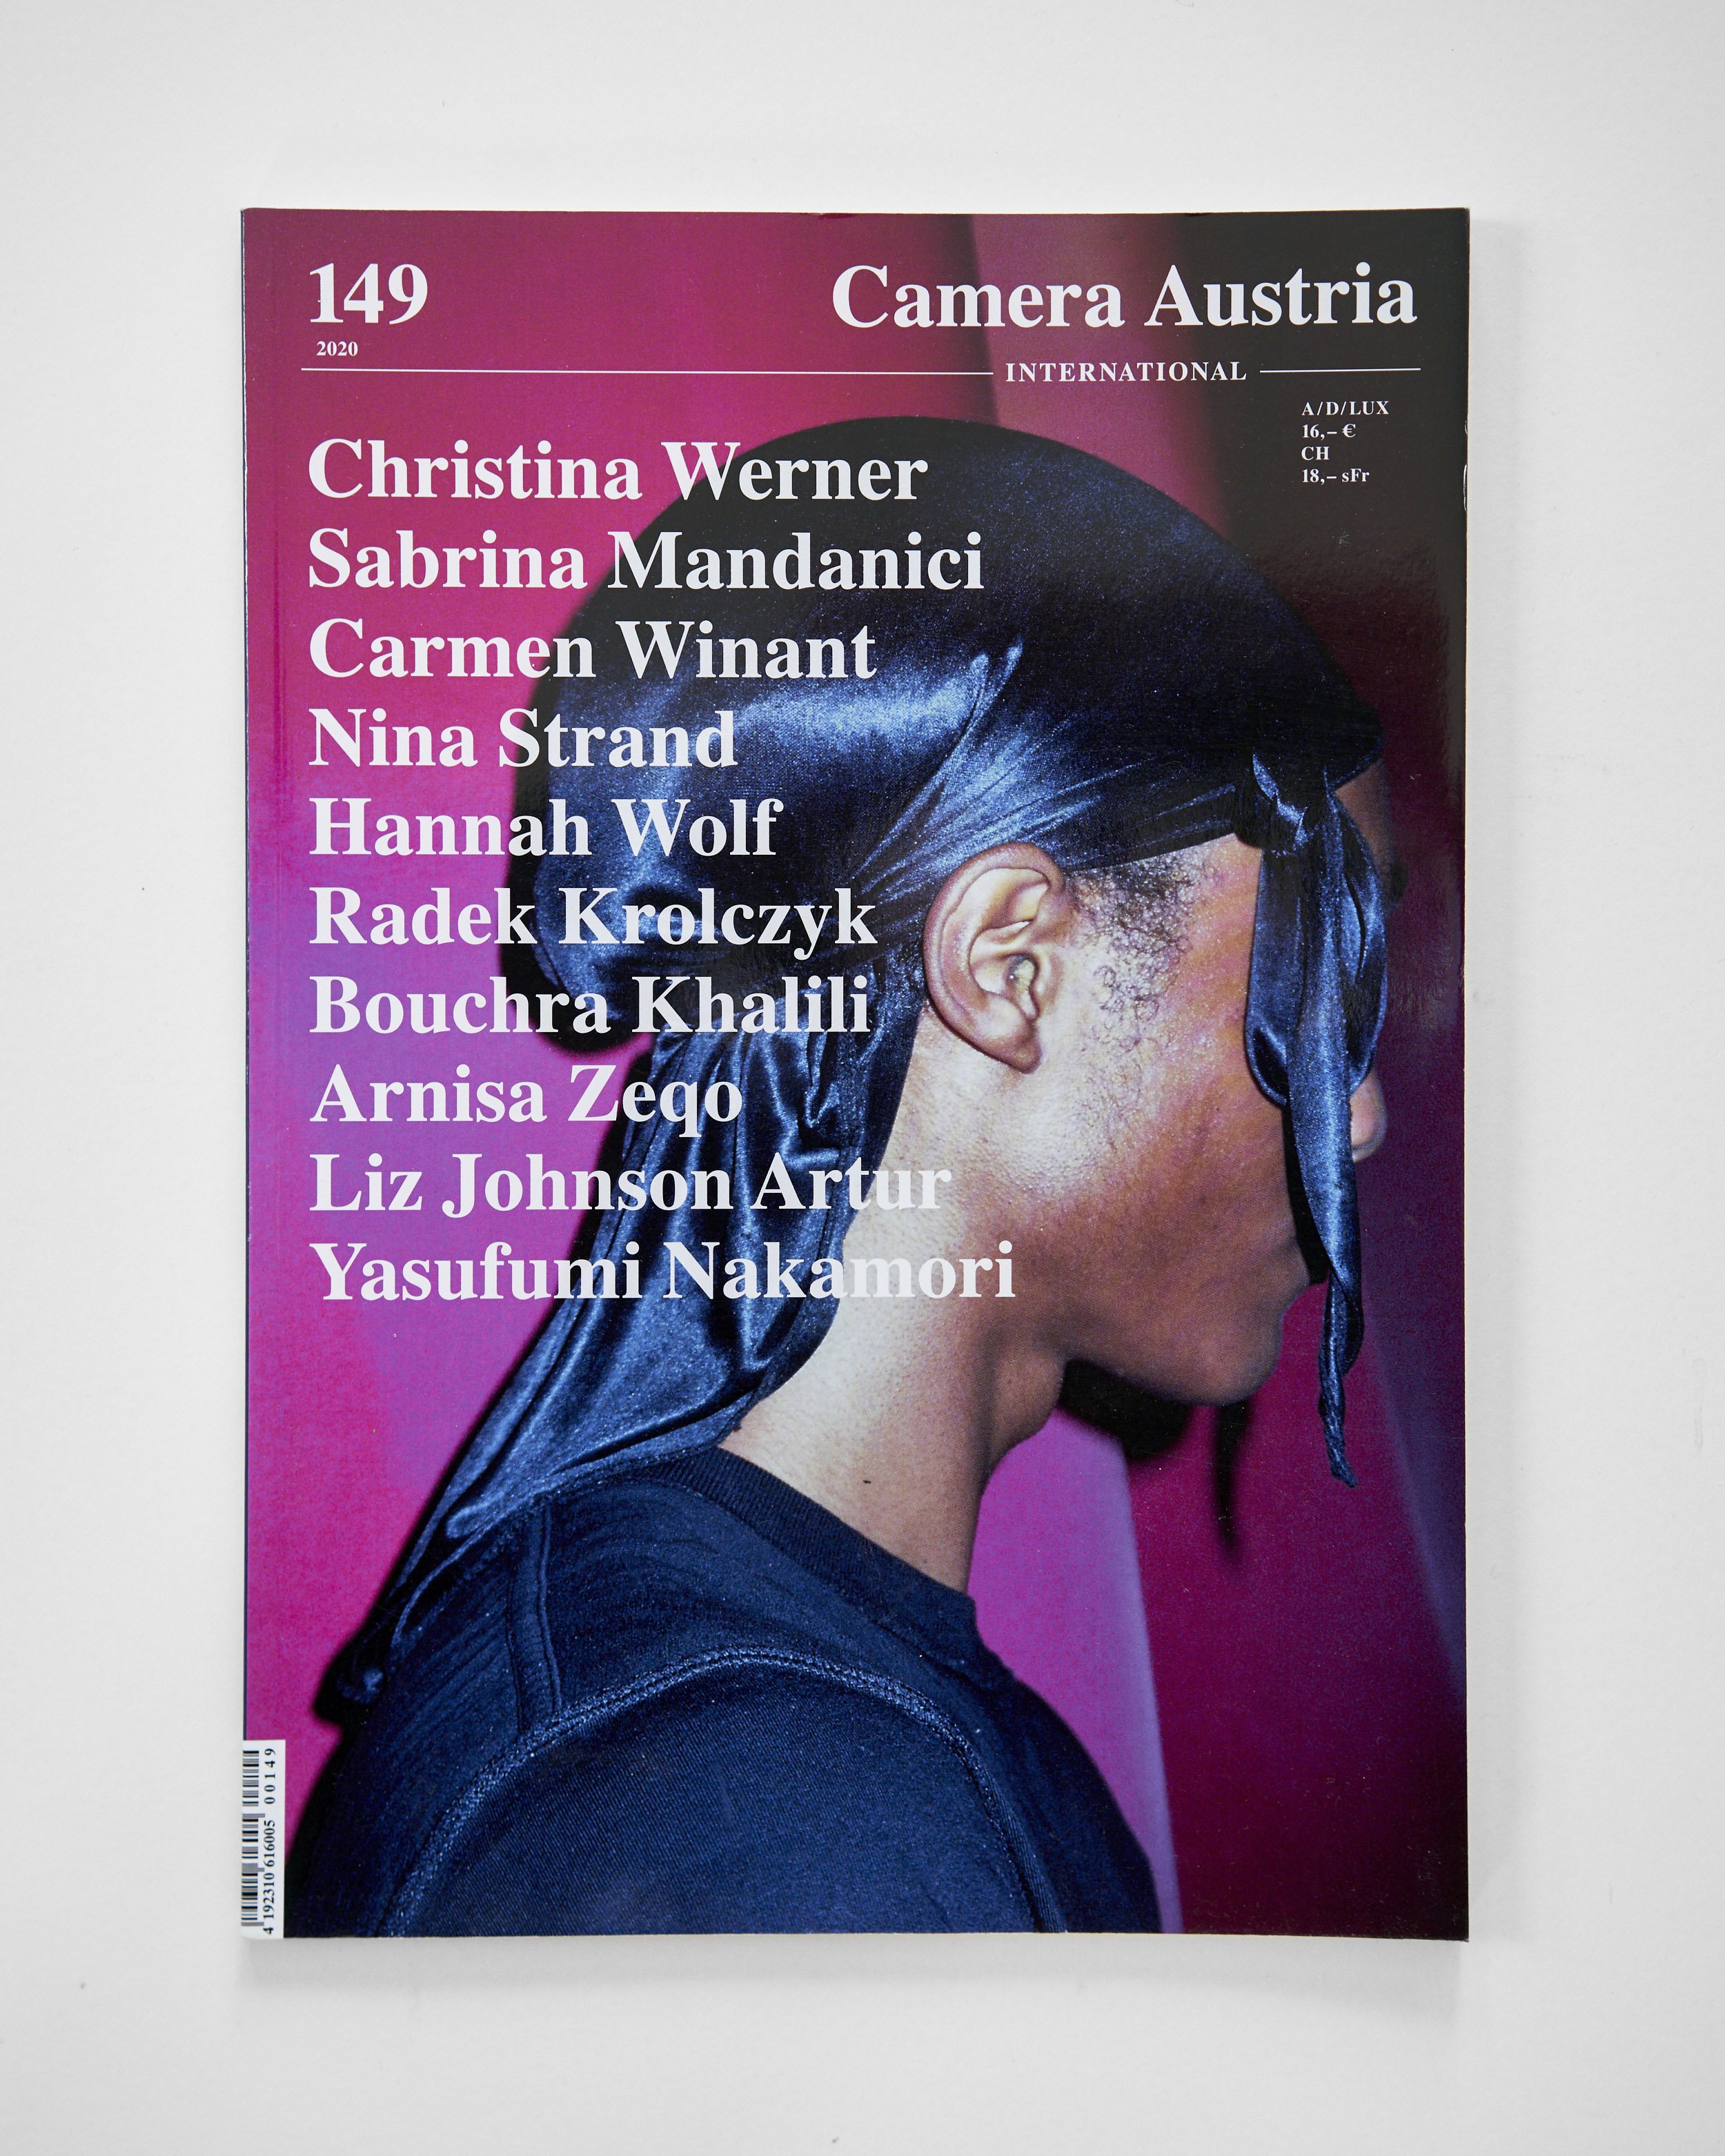  Camera Austria Issue 149 (2019)  Featured in ‘forum’ section. 